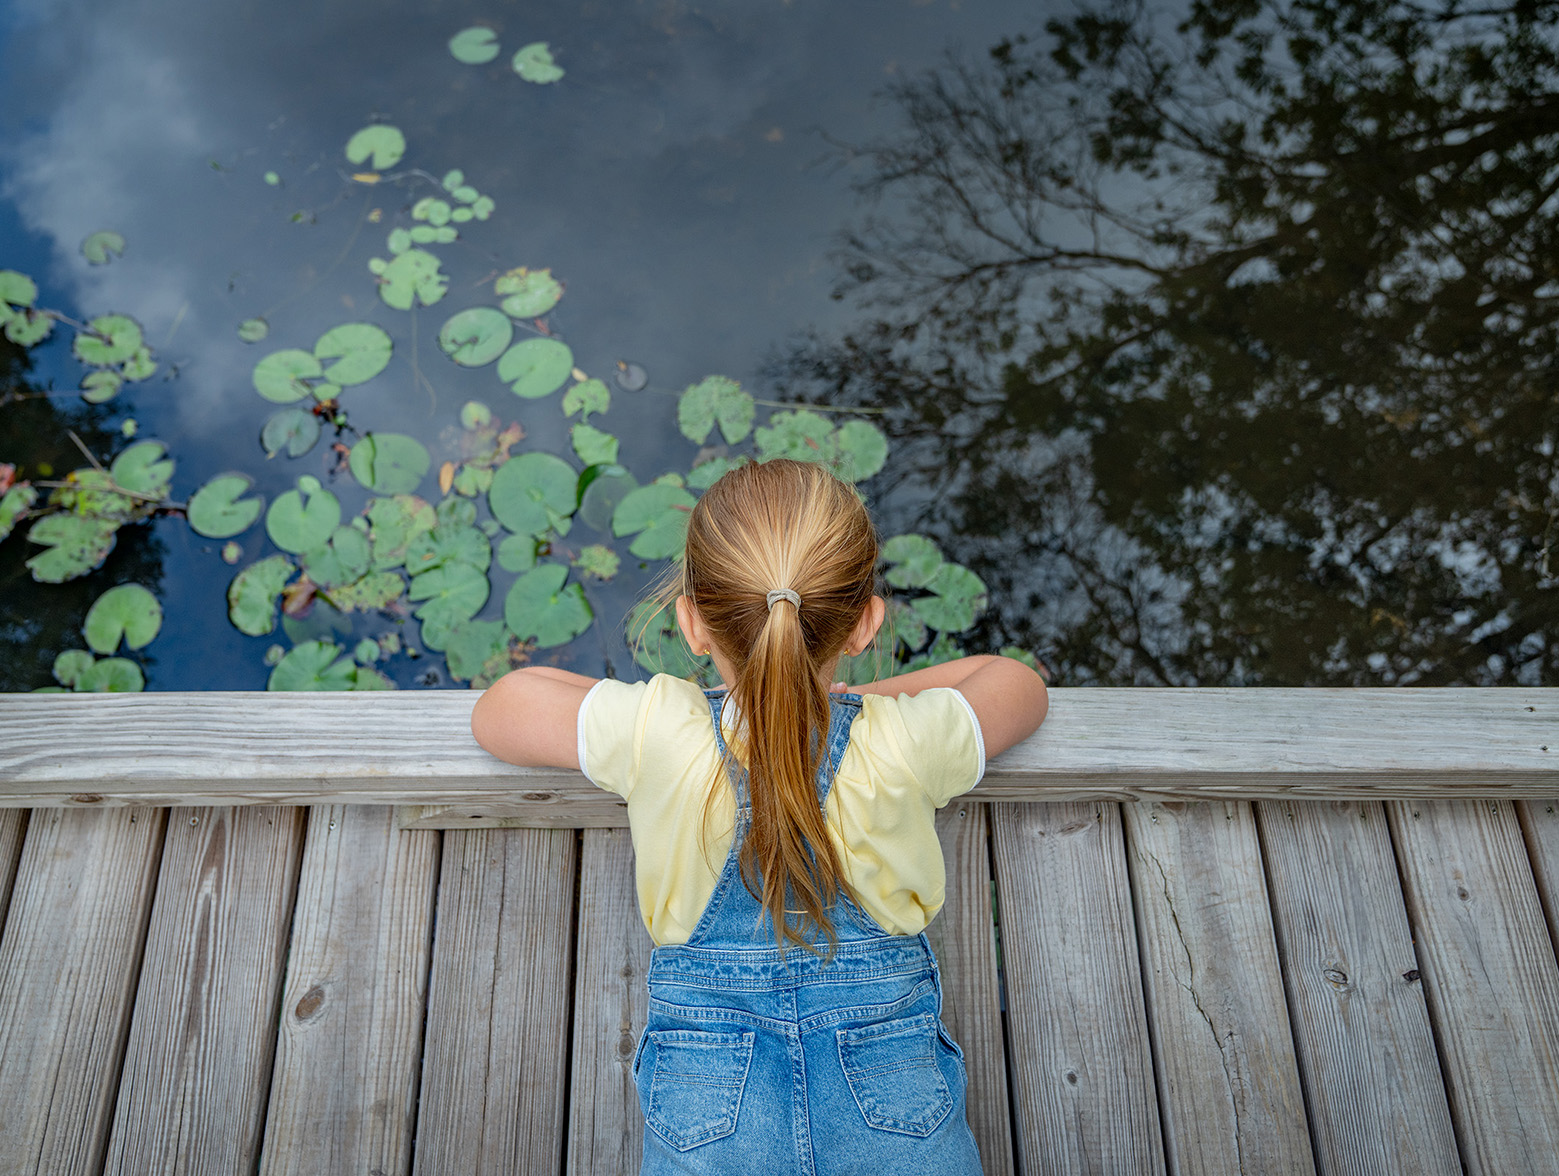 Young girl in overalls lays on boardwalk looking at lilypads.